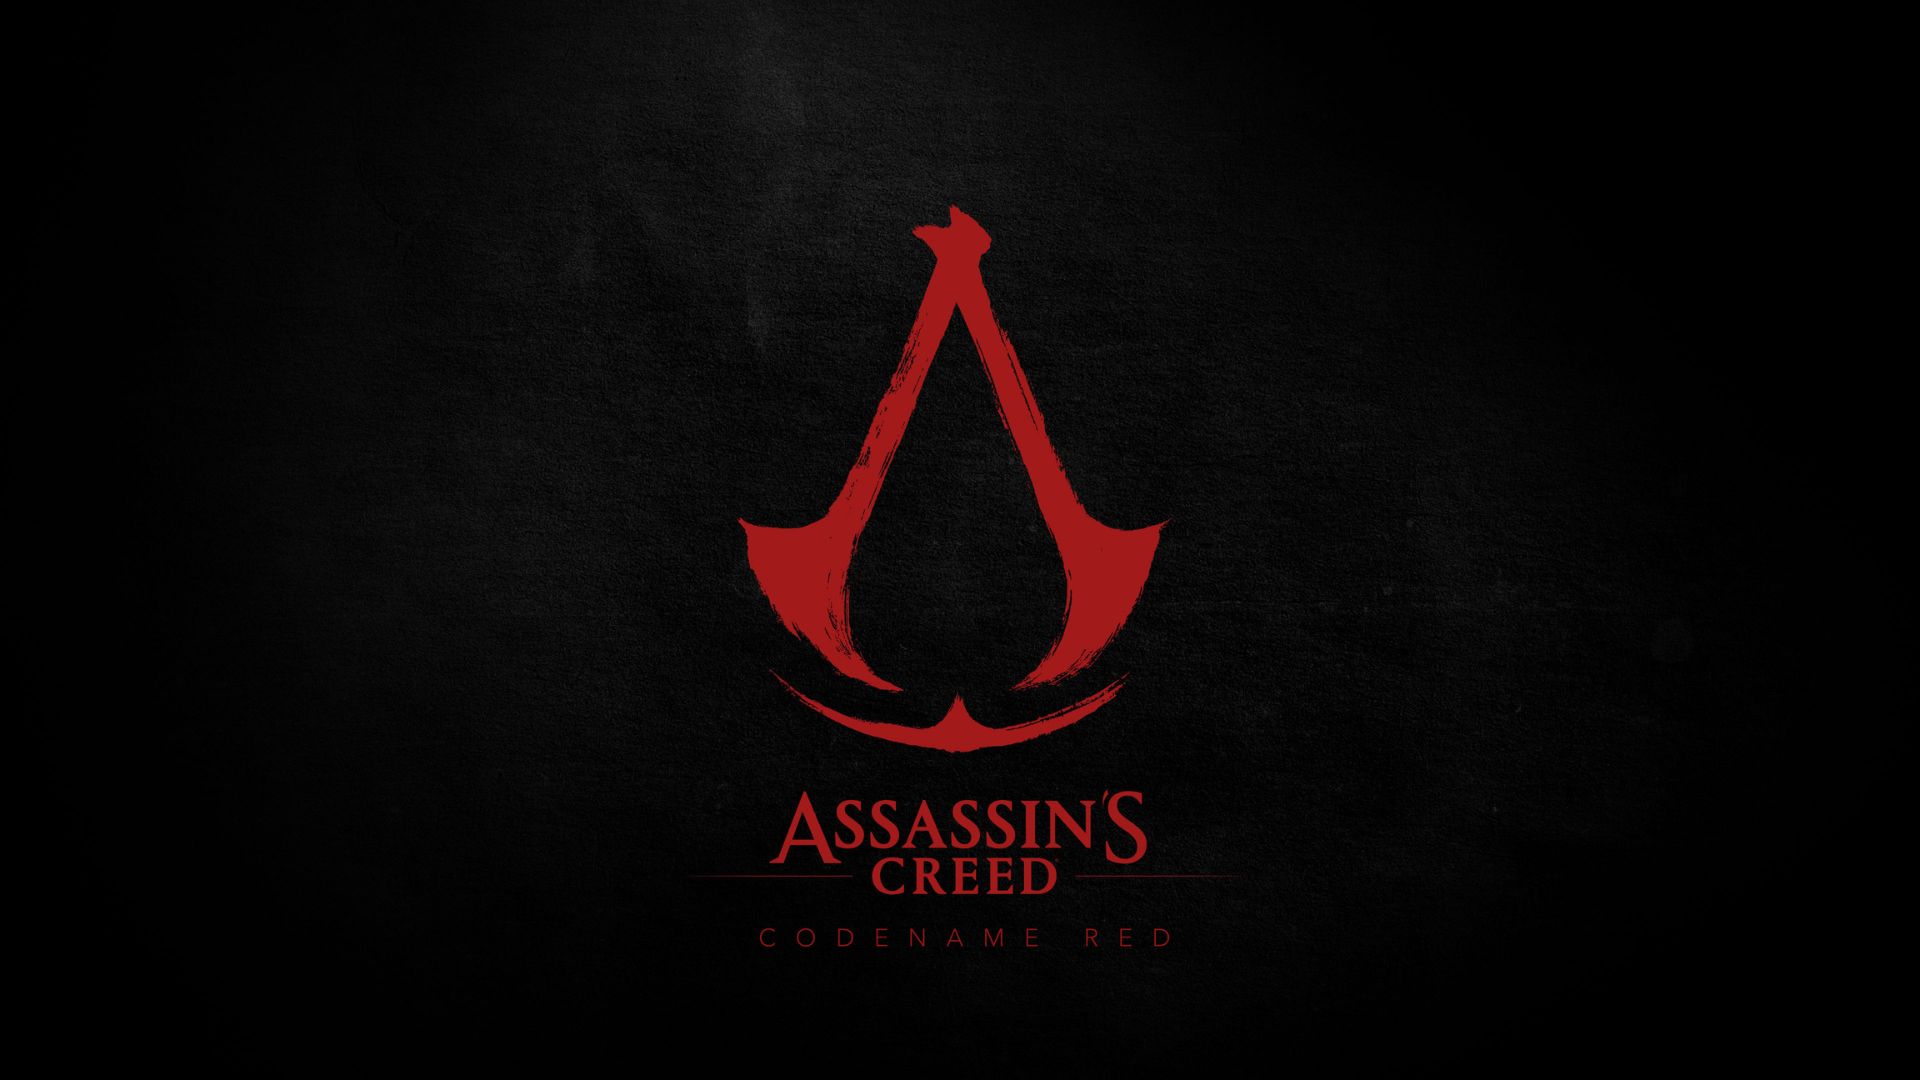 Assassin's Creed Codename Red Logo